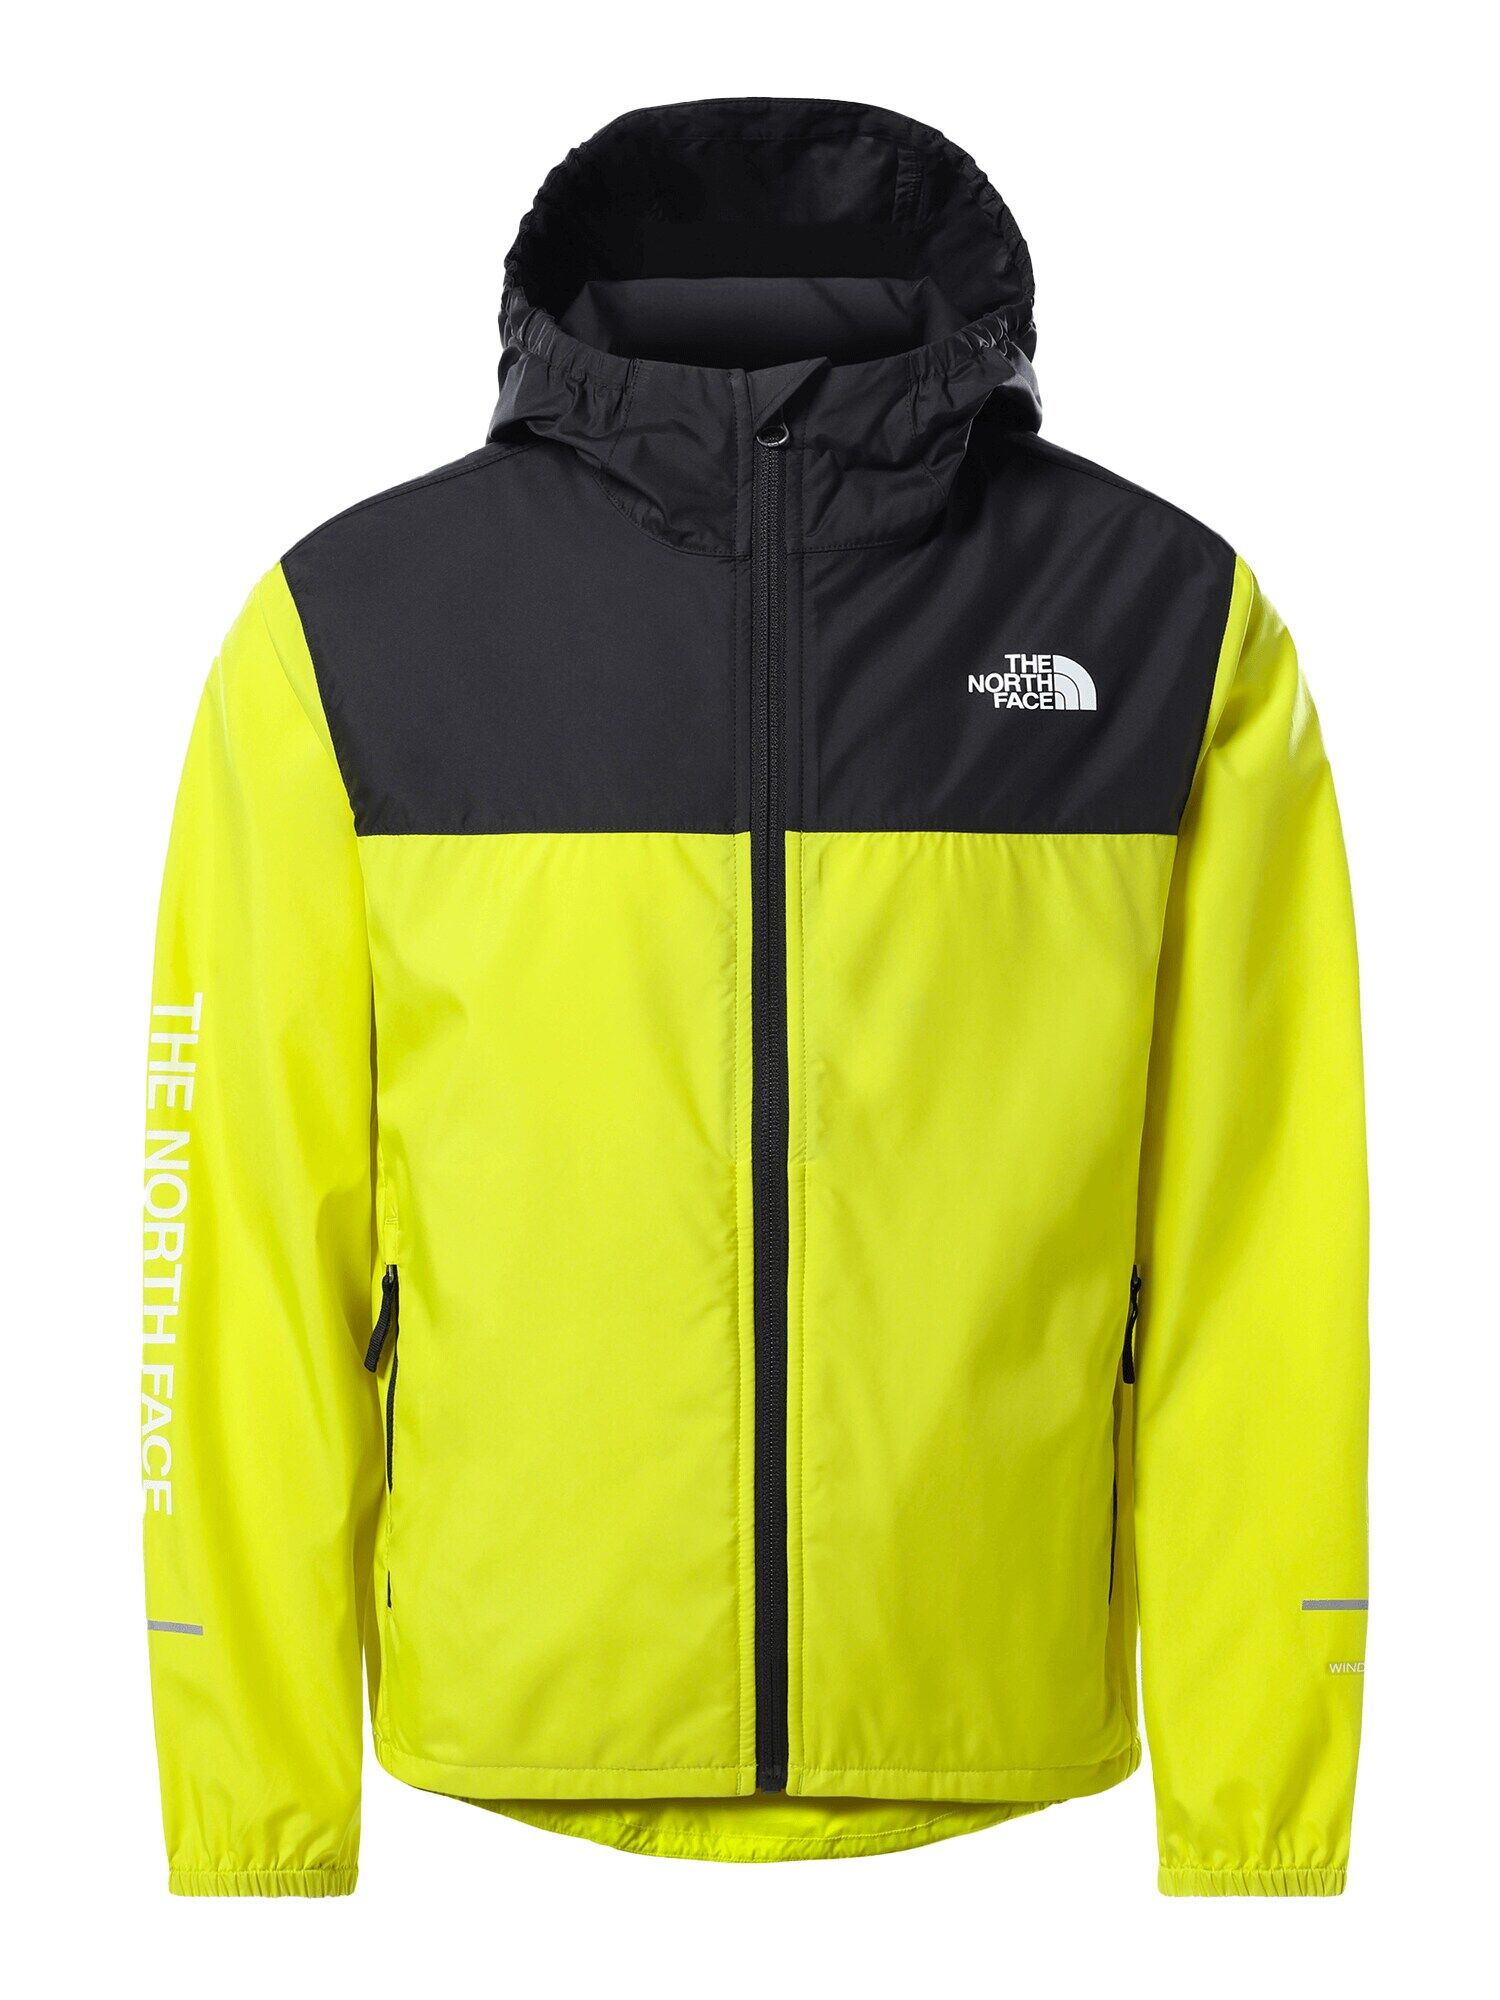 THE NORTH FACE Giacca per outdoor 'B REACTOR WIND JACKET' Verde